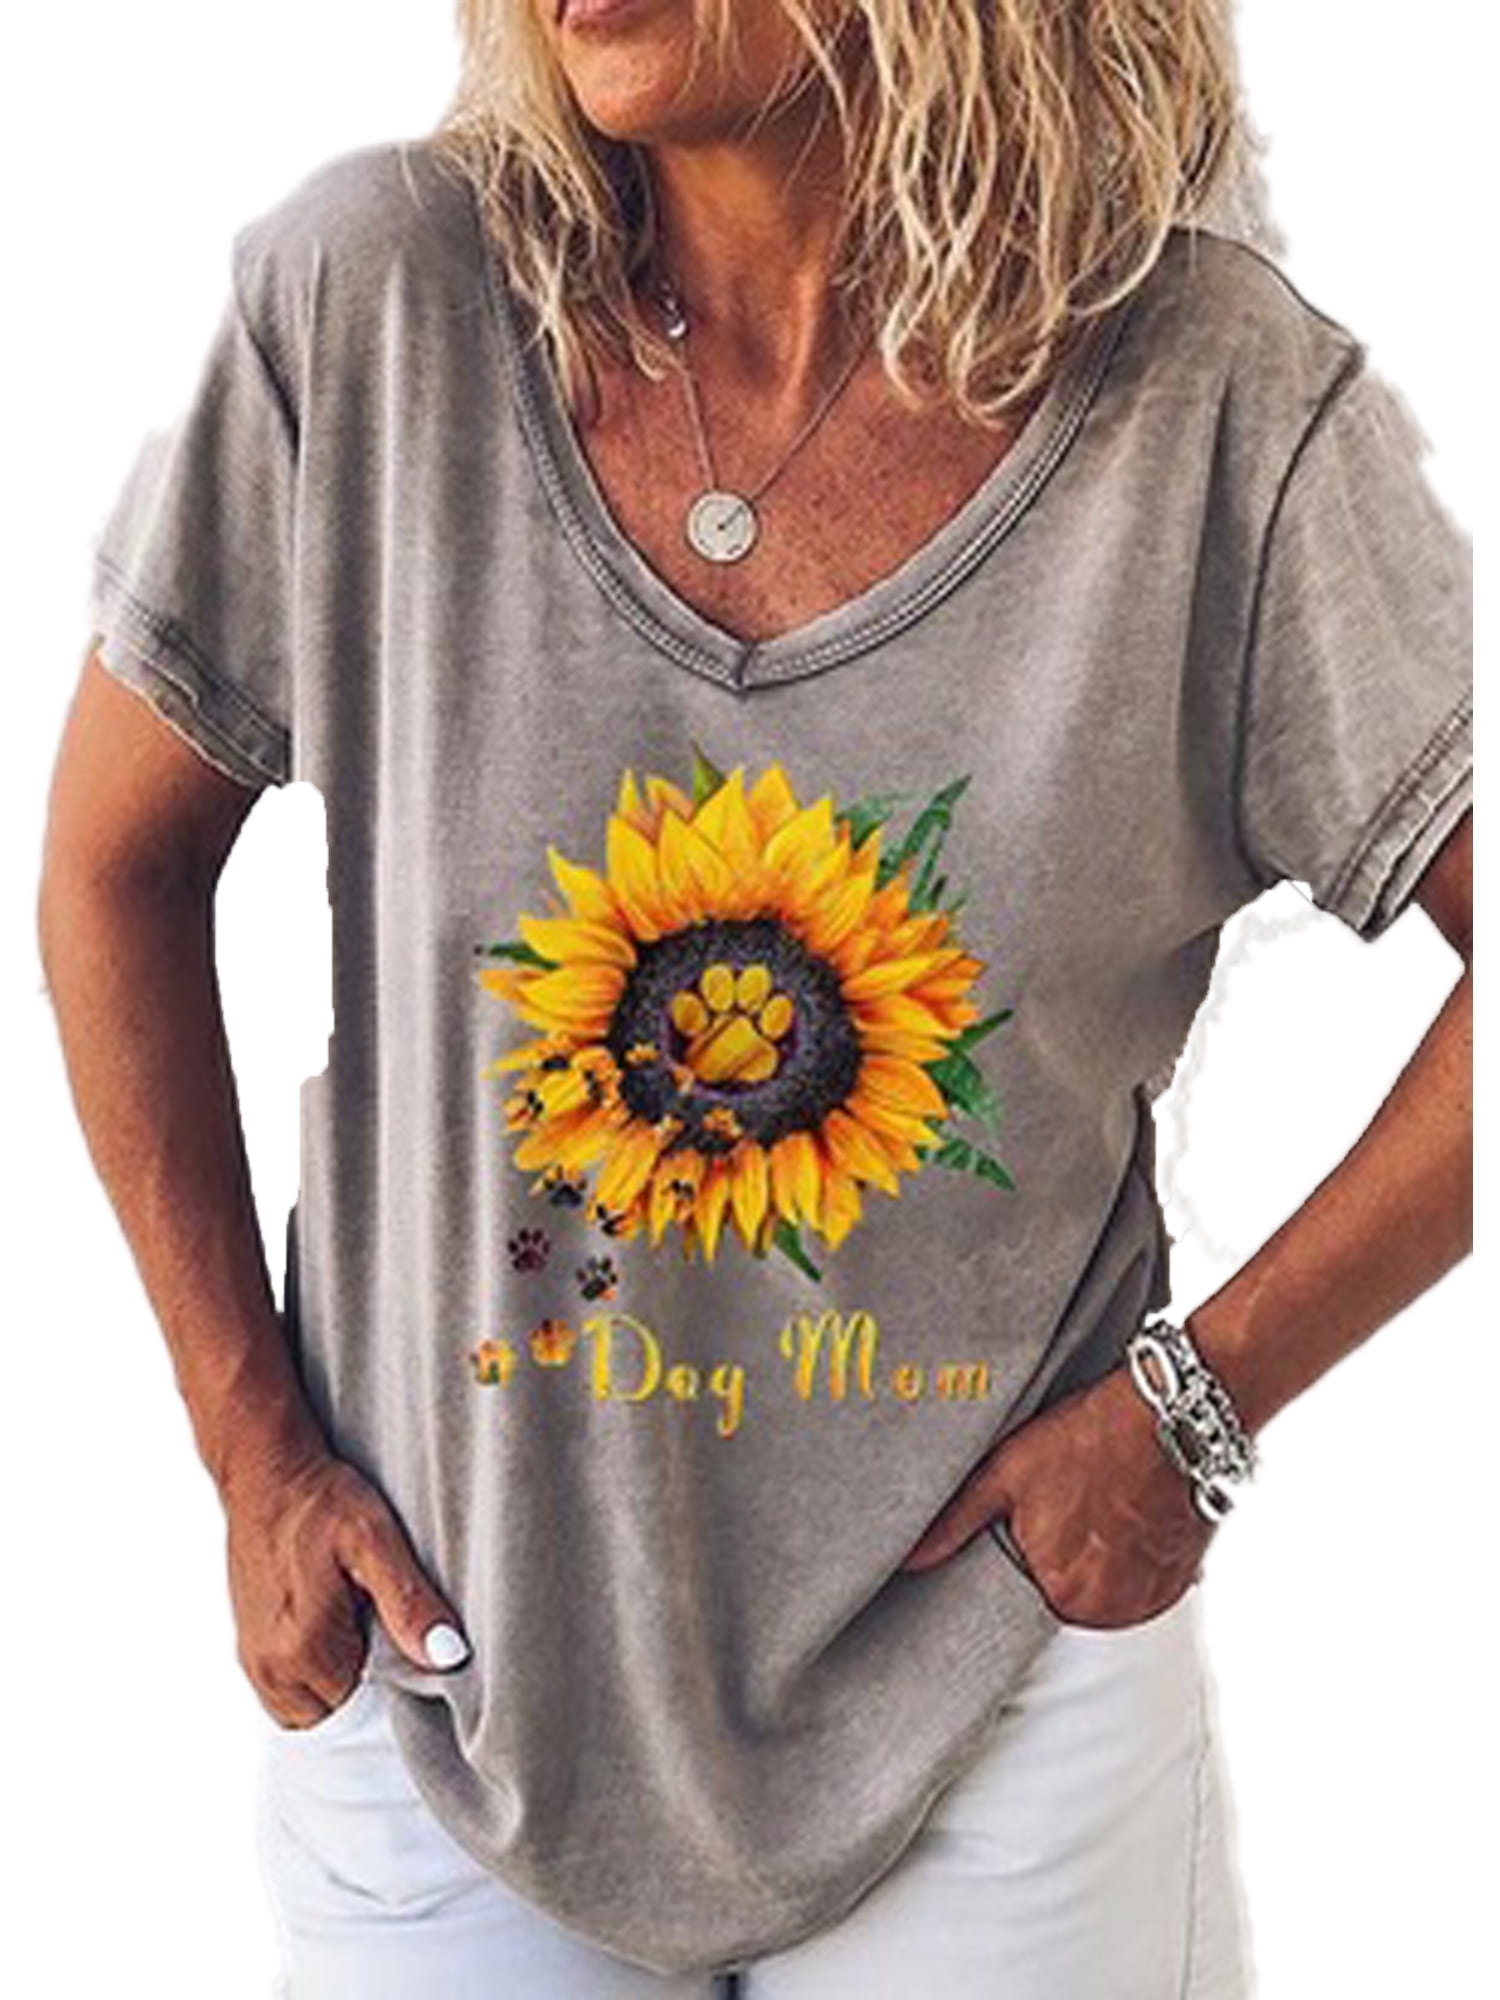 Sunflower Shirts for Women Summer Casual Loose Vintage Graphic Print Short Sleeve Crewneck Tee T Shirt Tops Blouse 